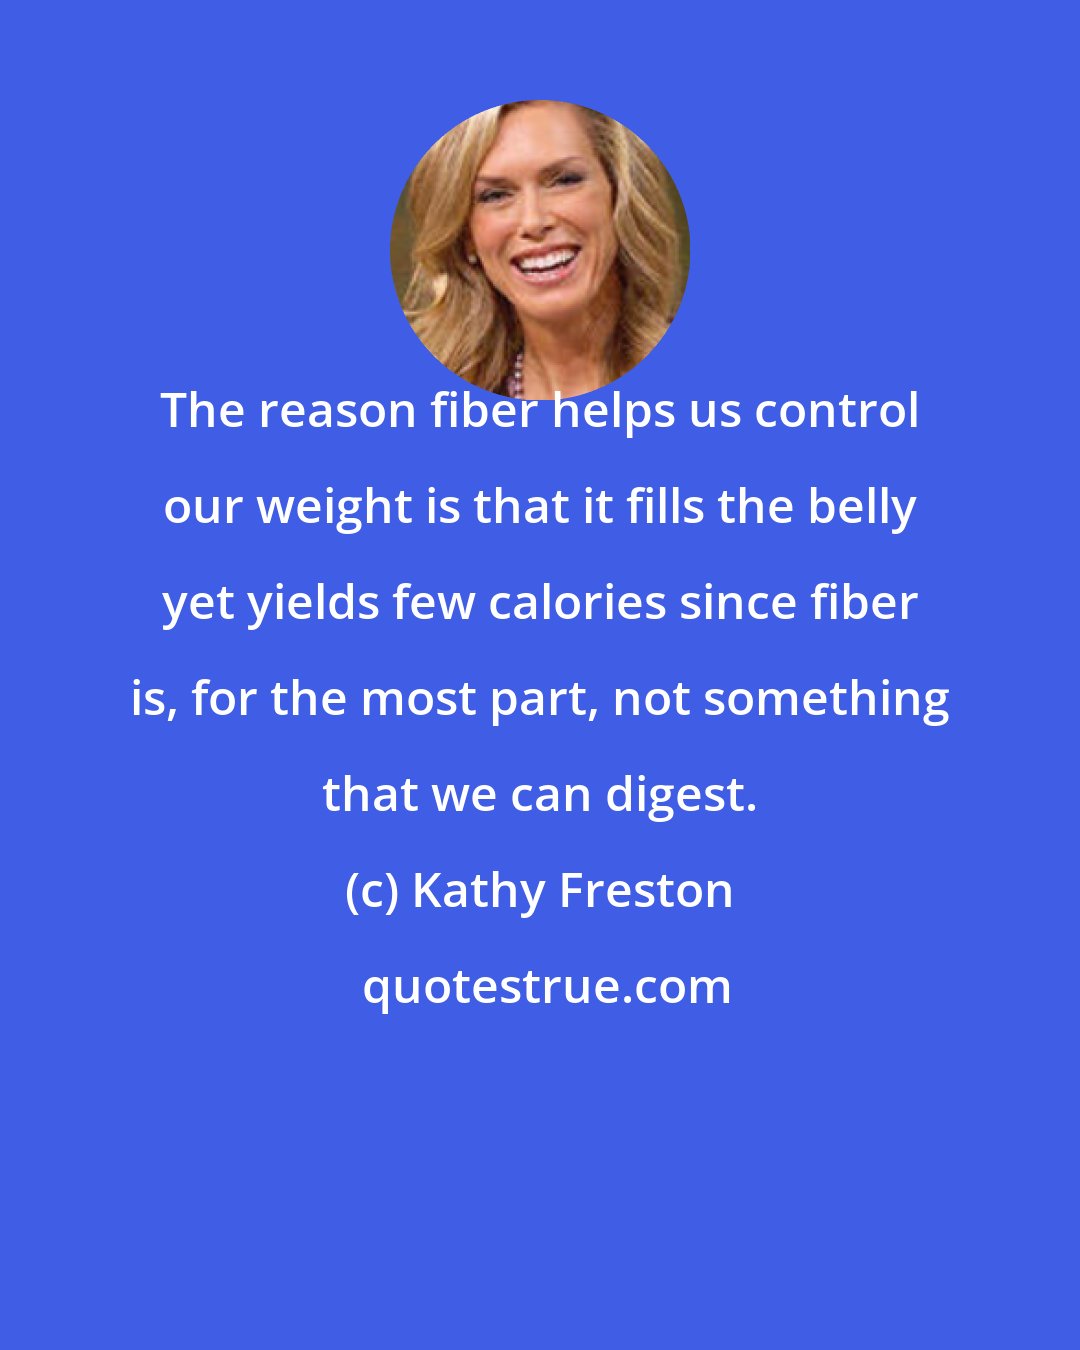 Kathy Freston: The reason fiber helps us control our weight is that it fills the belly yet yields few calories since fiber is, for the most part, not something that we can digest.